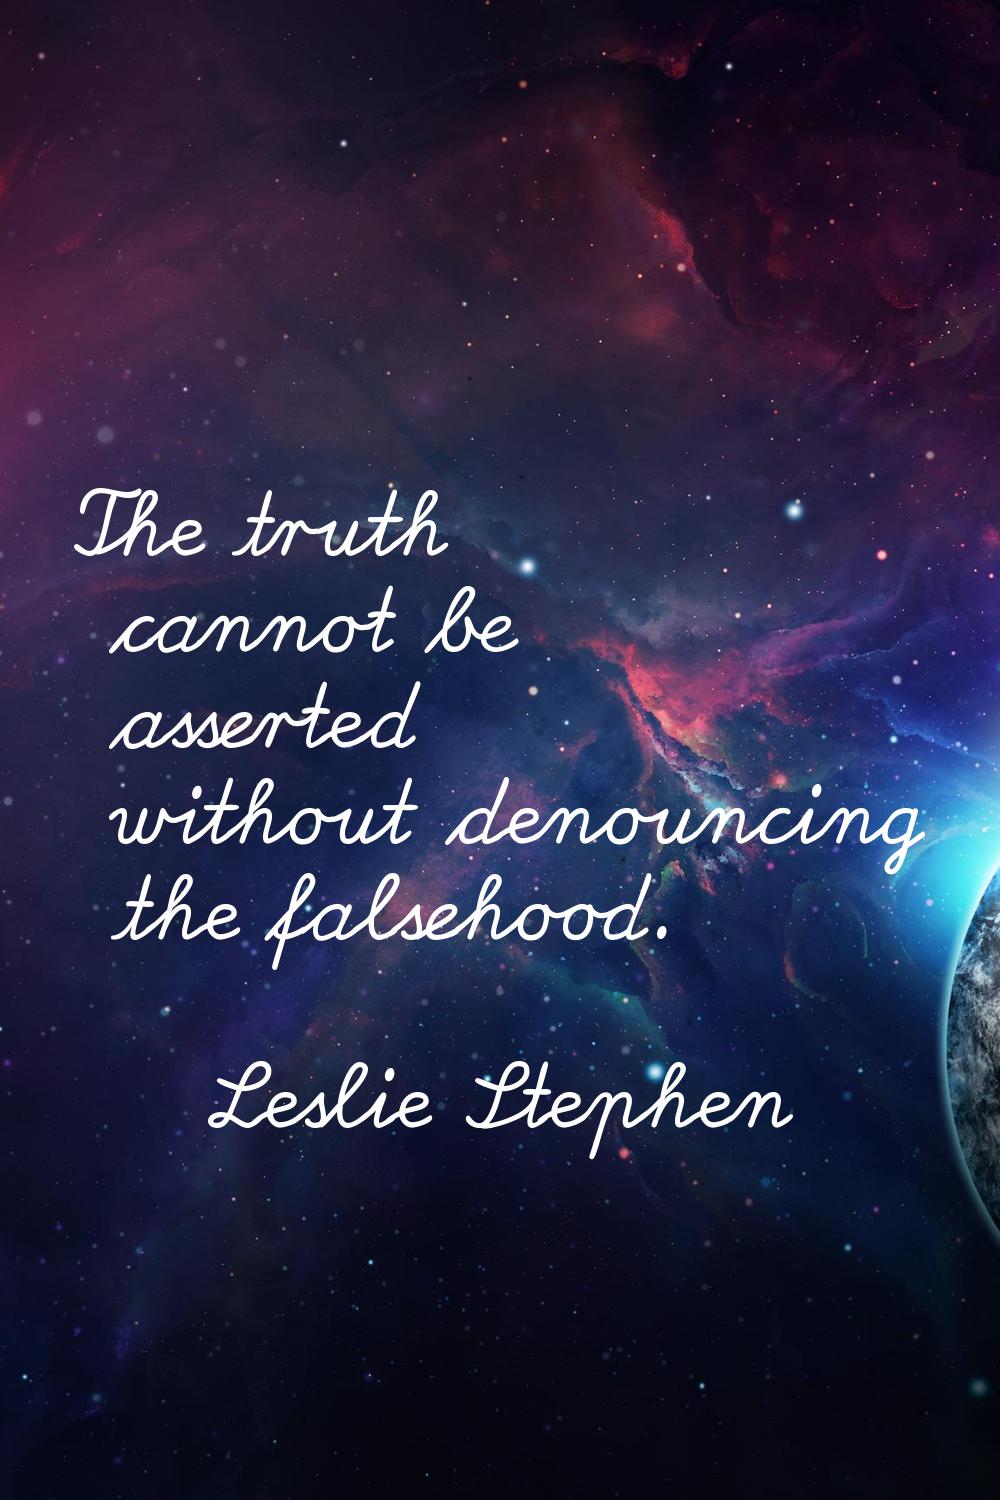 The truth cannot be asserted without denouncing the falsehood.